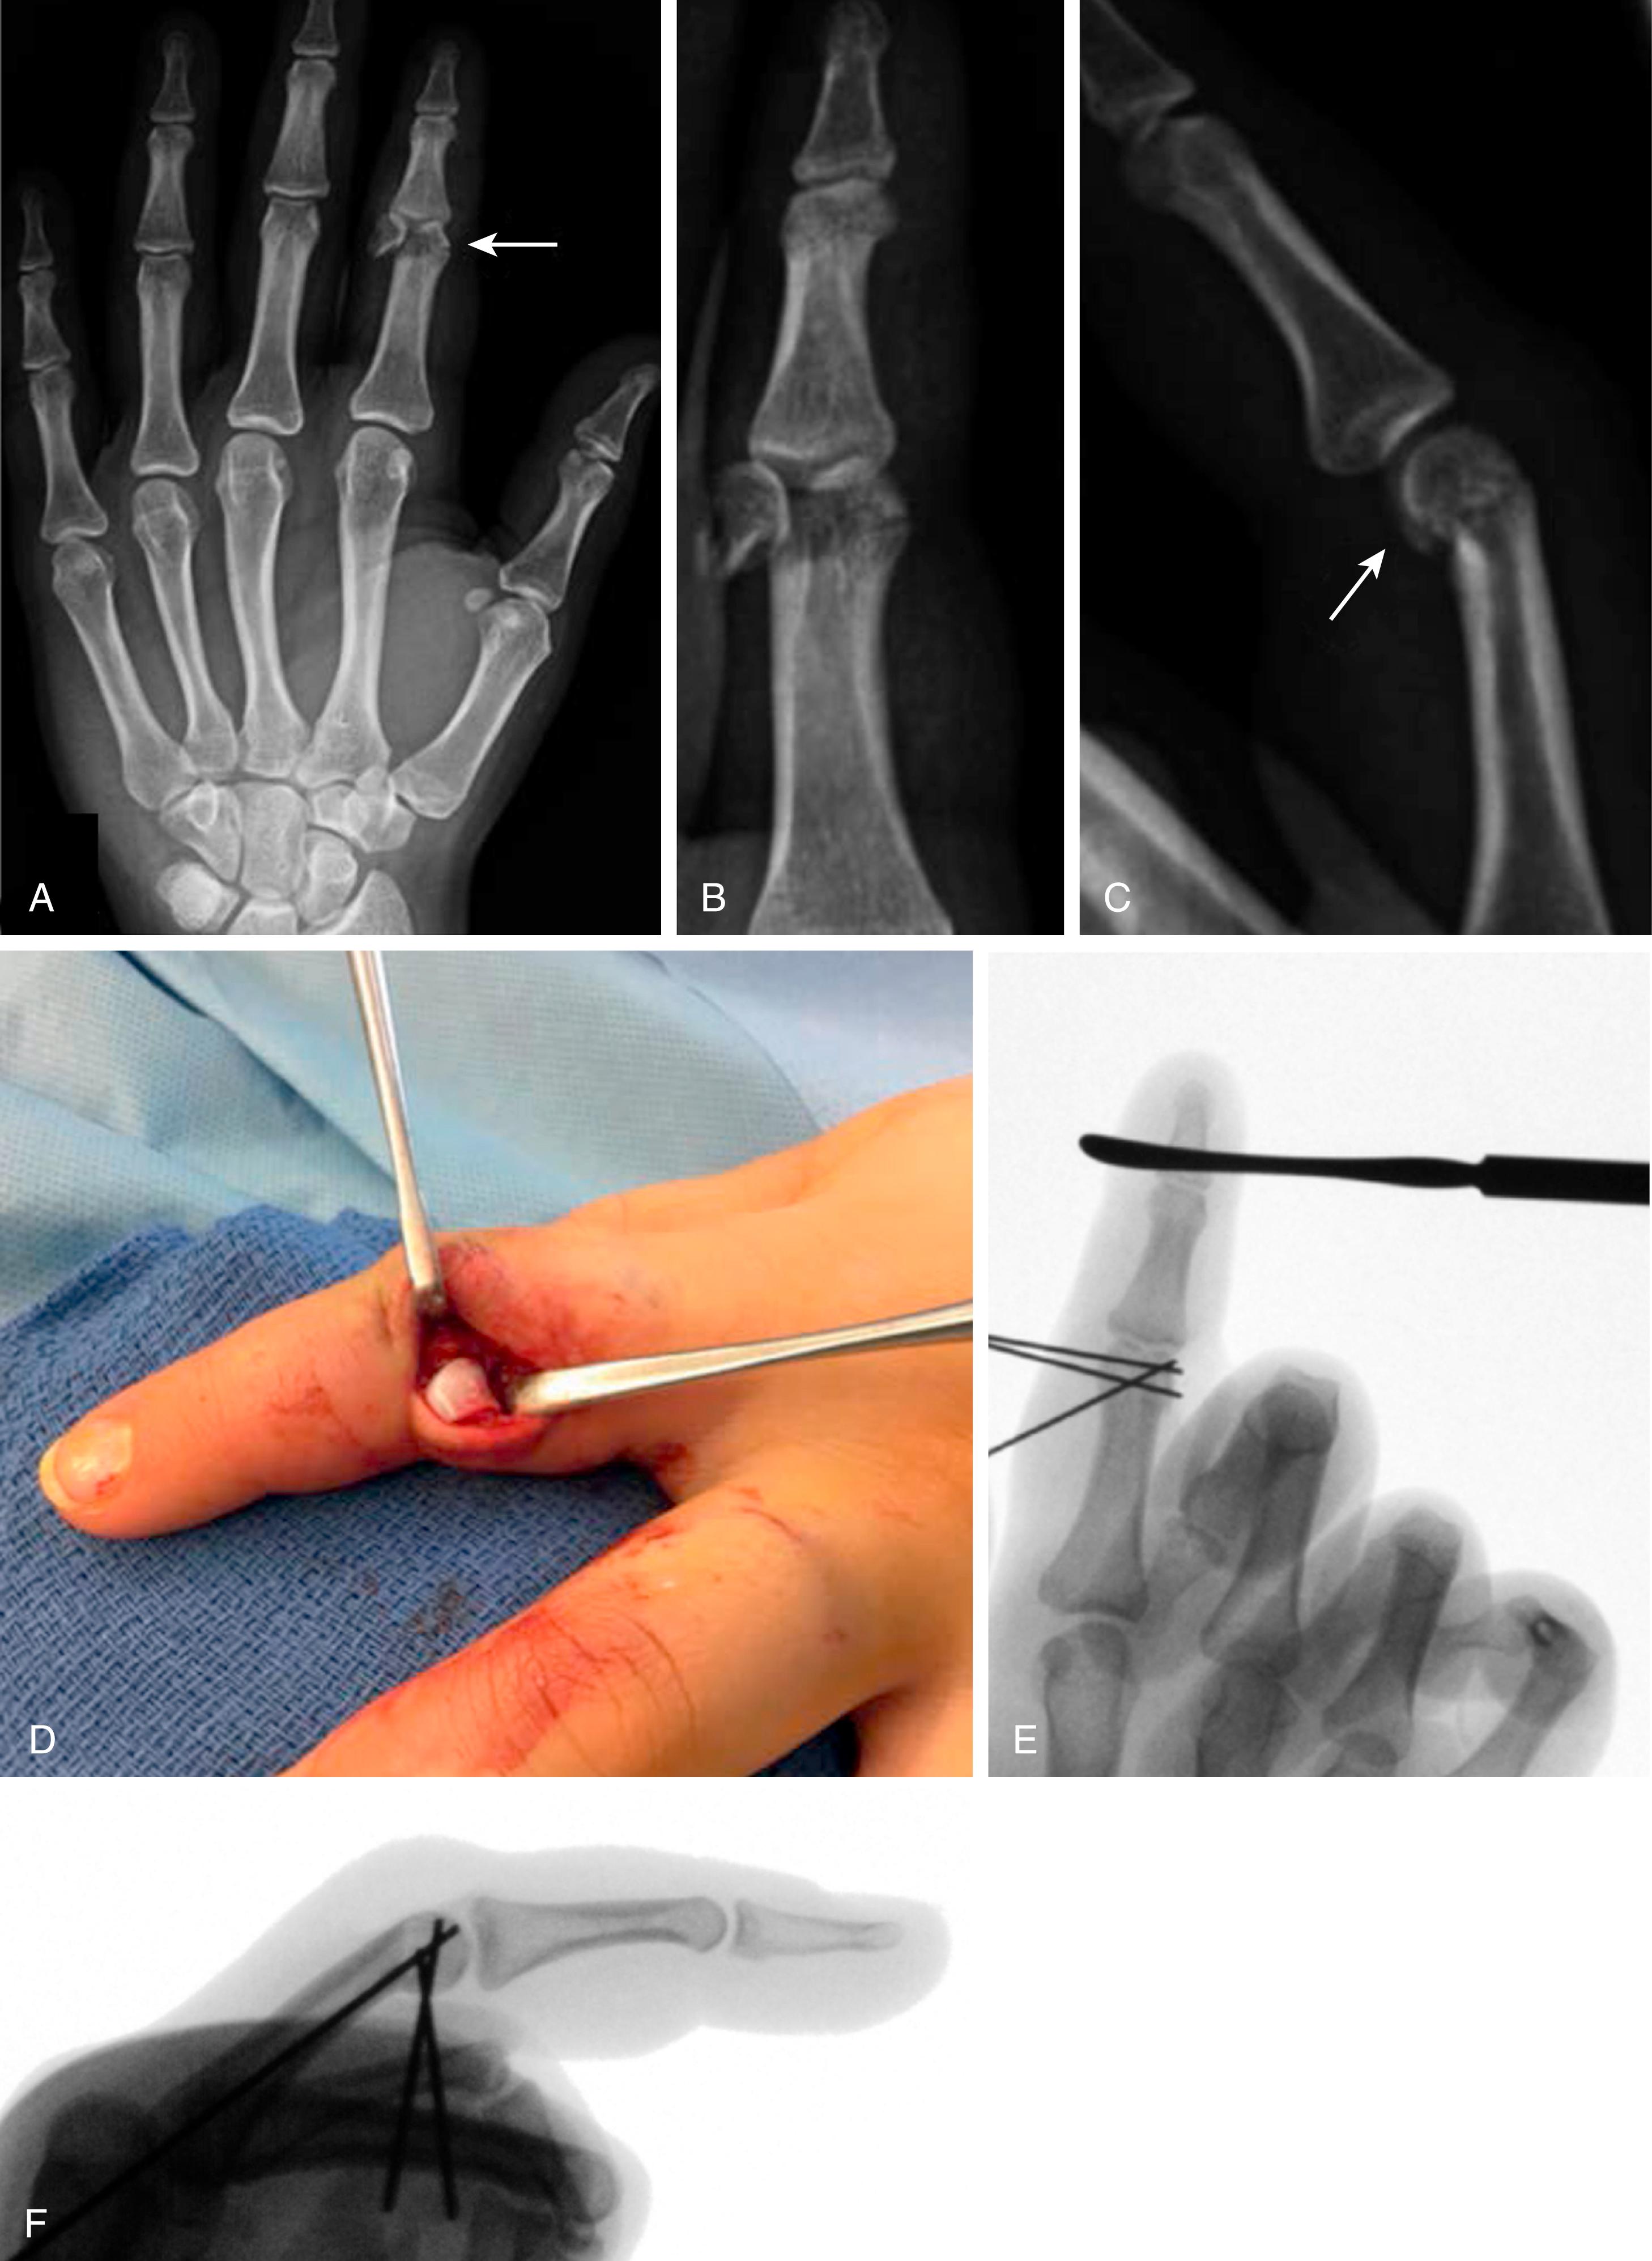 Fig. 41.10, AP (A) , oblique (B) , and lateral (C) radiographs showing a displaced unicondylar fracture of the index finger in a 14-year-old female. D, Intraoperative photograph depicting the incision to exposure the fracture, and complete displacement and 90-degree rotation of the unicondylar fragment. E and F, Intraoperative fluoroscopy after open reduction and pin fixation.